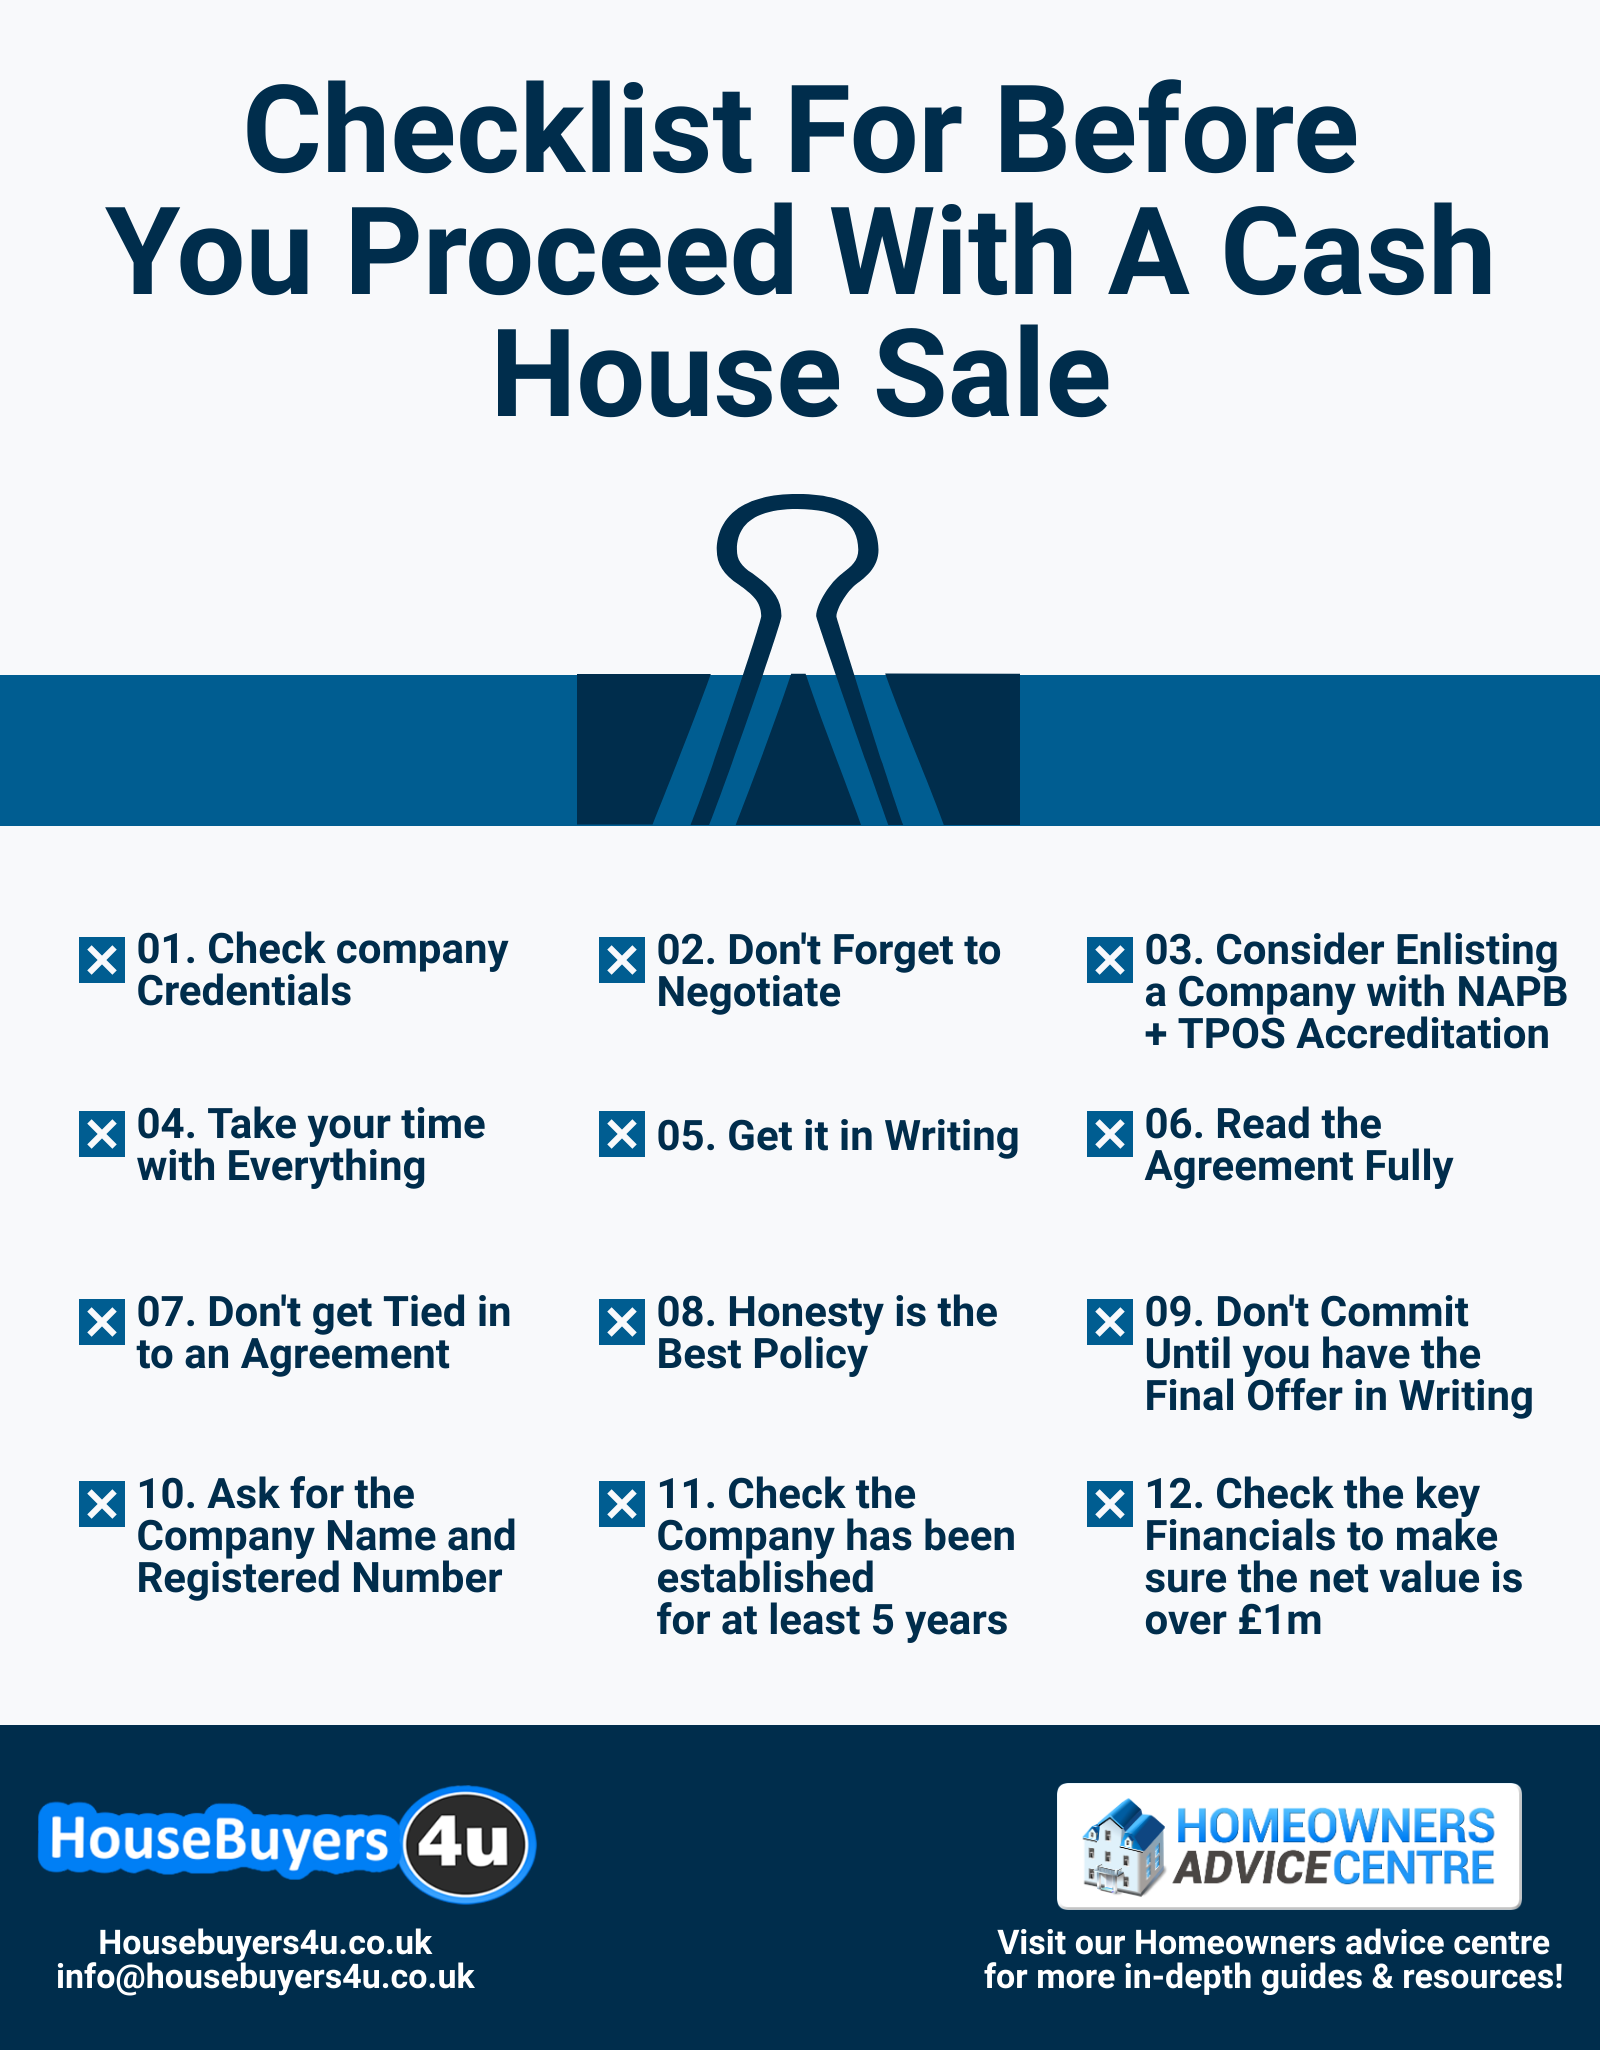 Checklist for before you proceed with a cash house sale